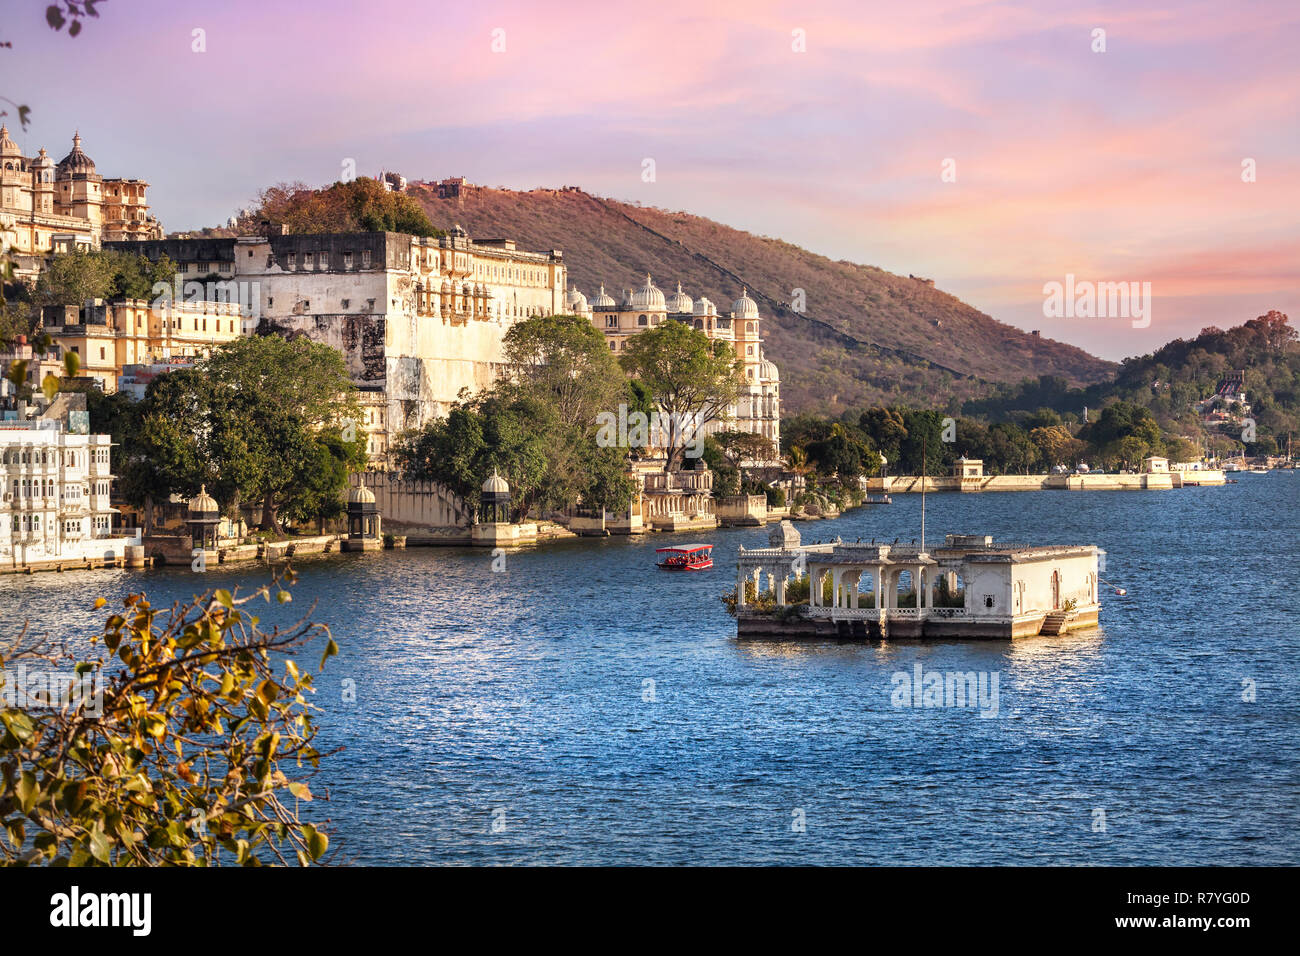 Lake Pichola with City Palace view at pink sunset sky in Udaipur, Rajasthan, India Stock Photo